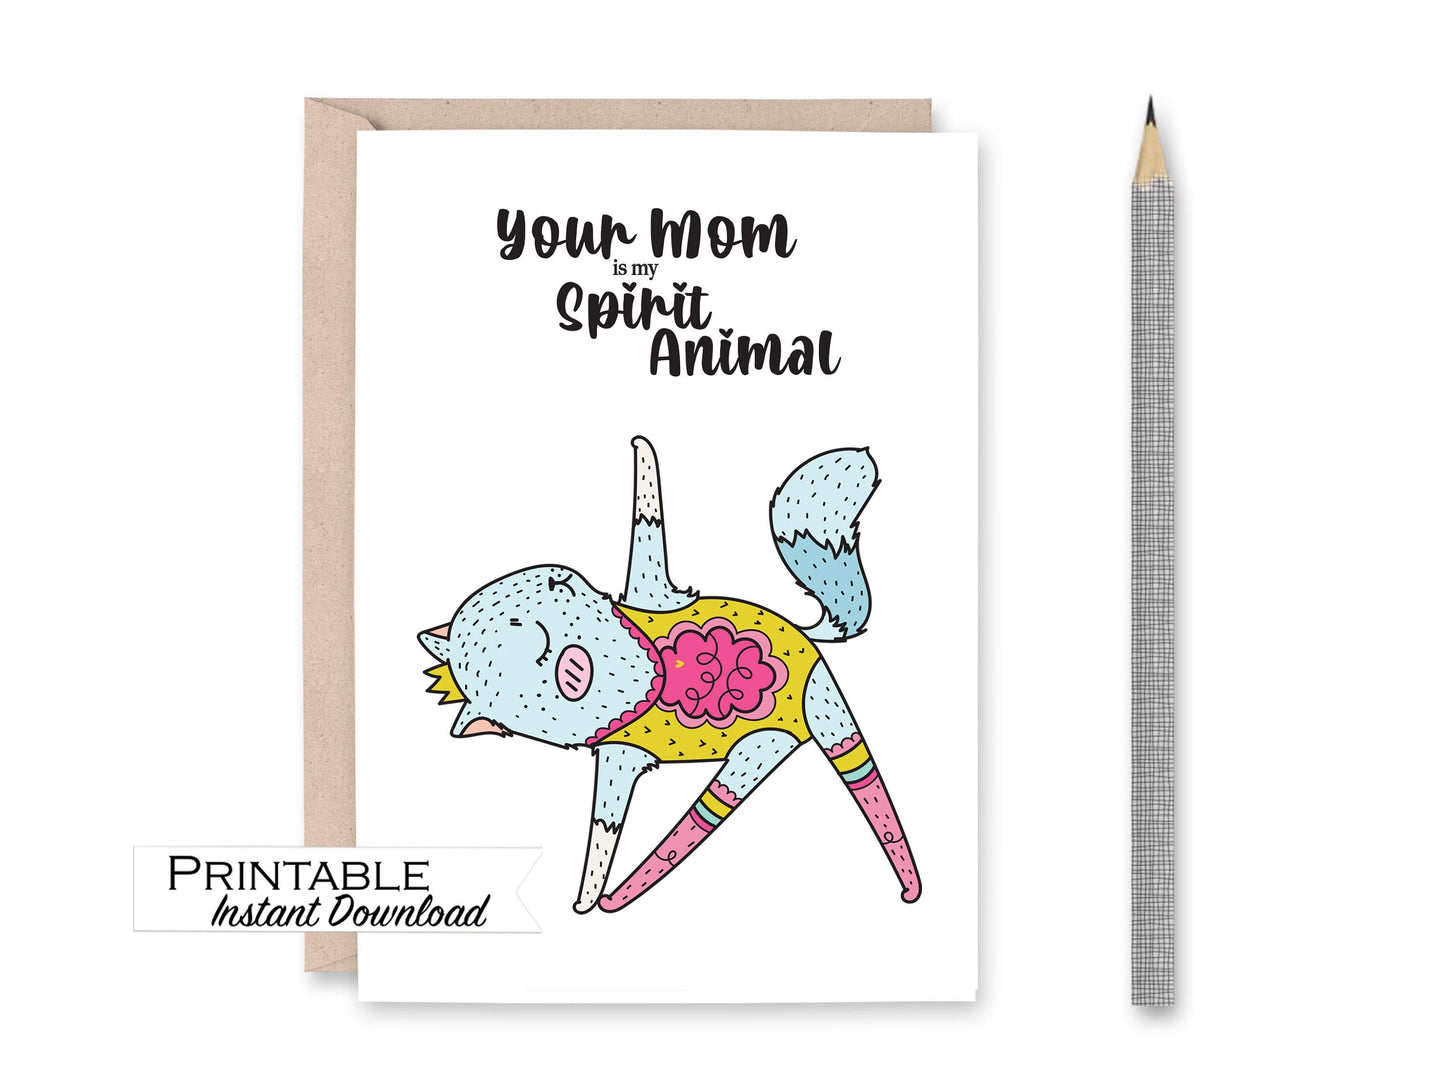 Your Mom is my Spirit Animal Funny Card Printable - Digital Download